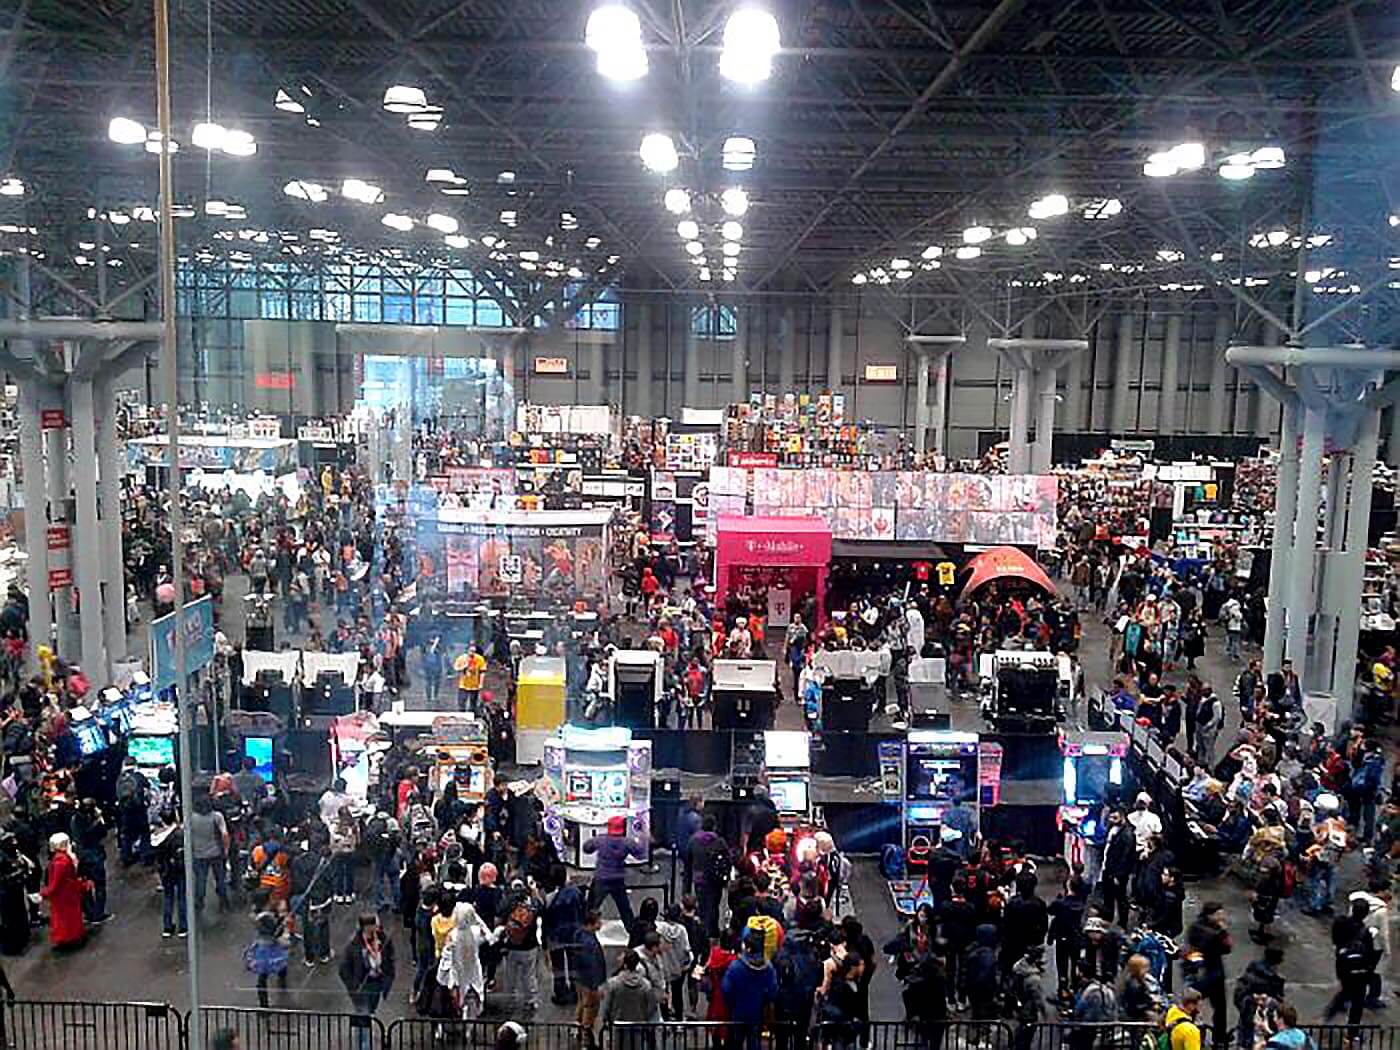 10 Largest Anime Conventions in USA